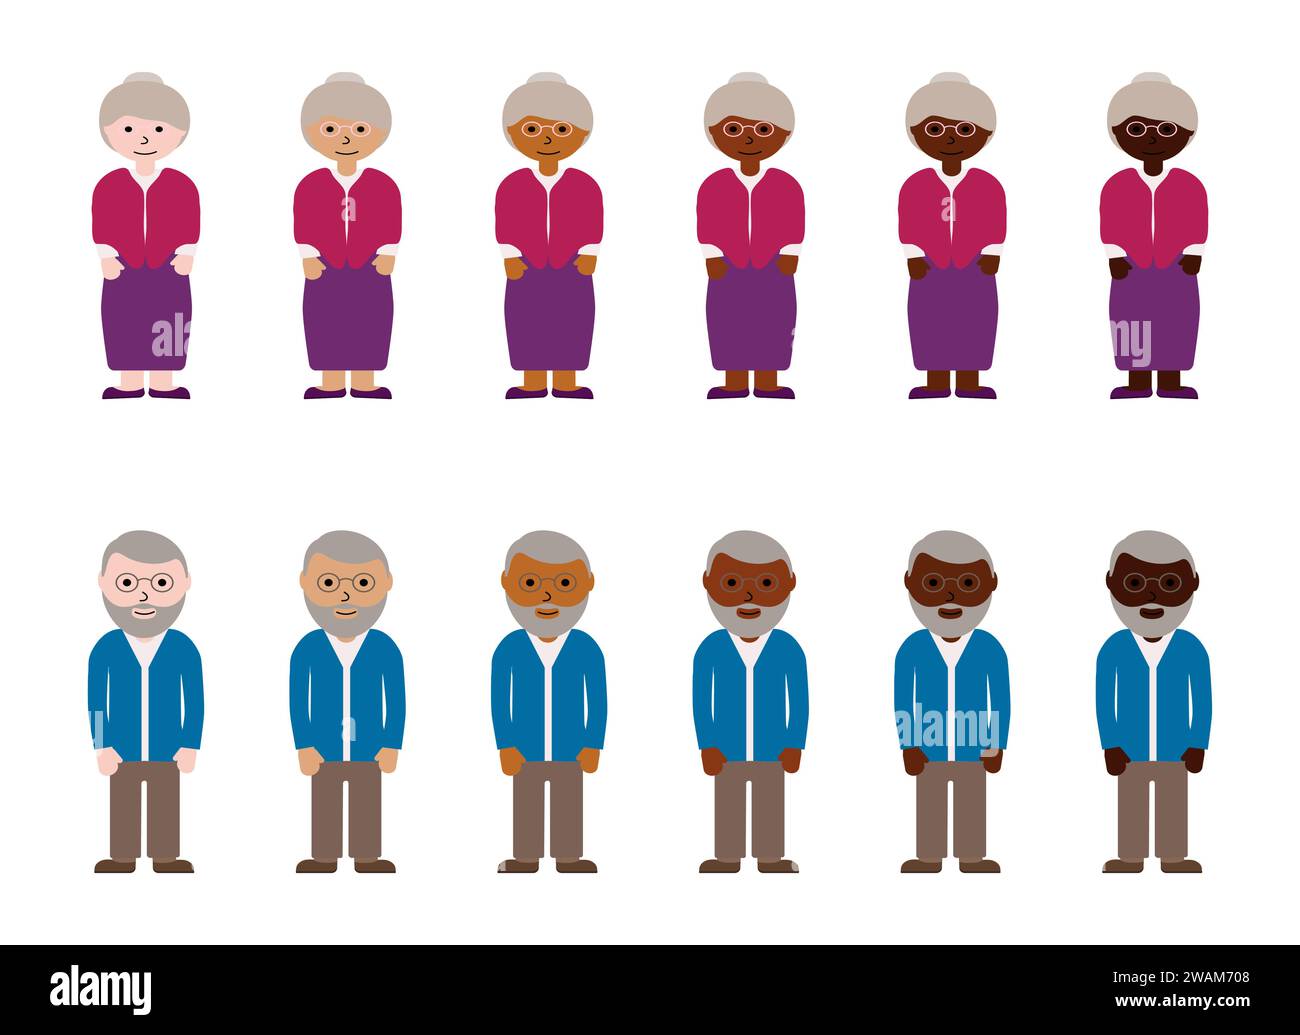 Grandmothers and grandfathers with different skin color. Old people or pensioners, Grandparents race diversity. Multinational vector illustration. Stock Vector